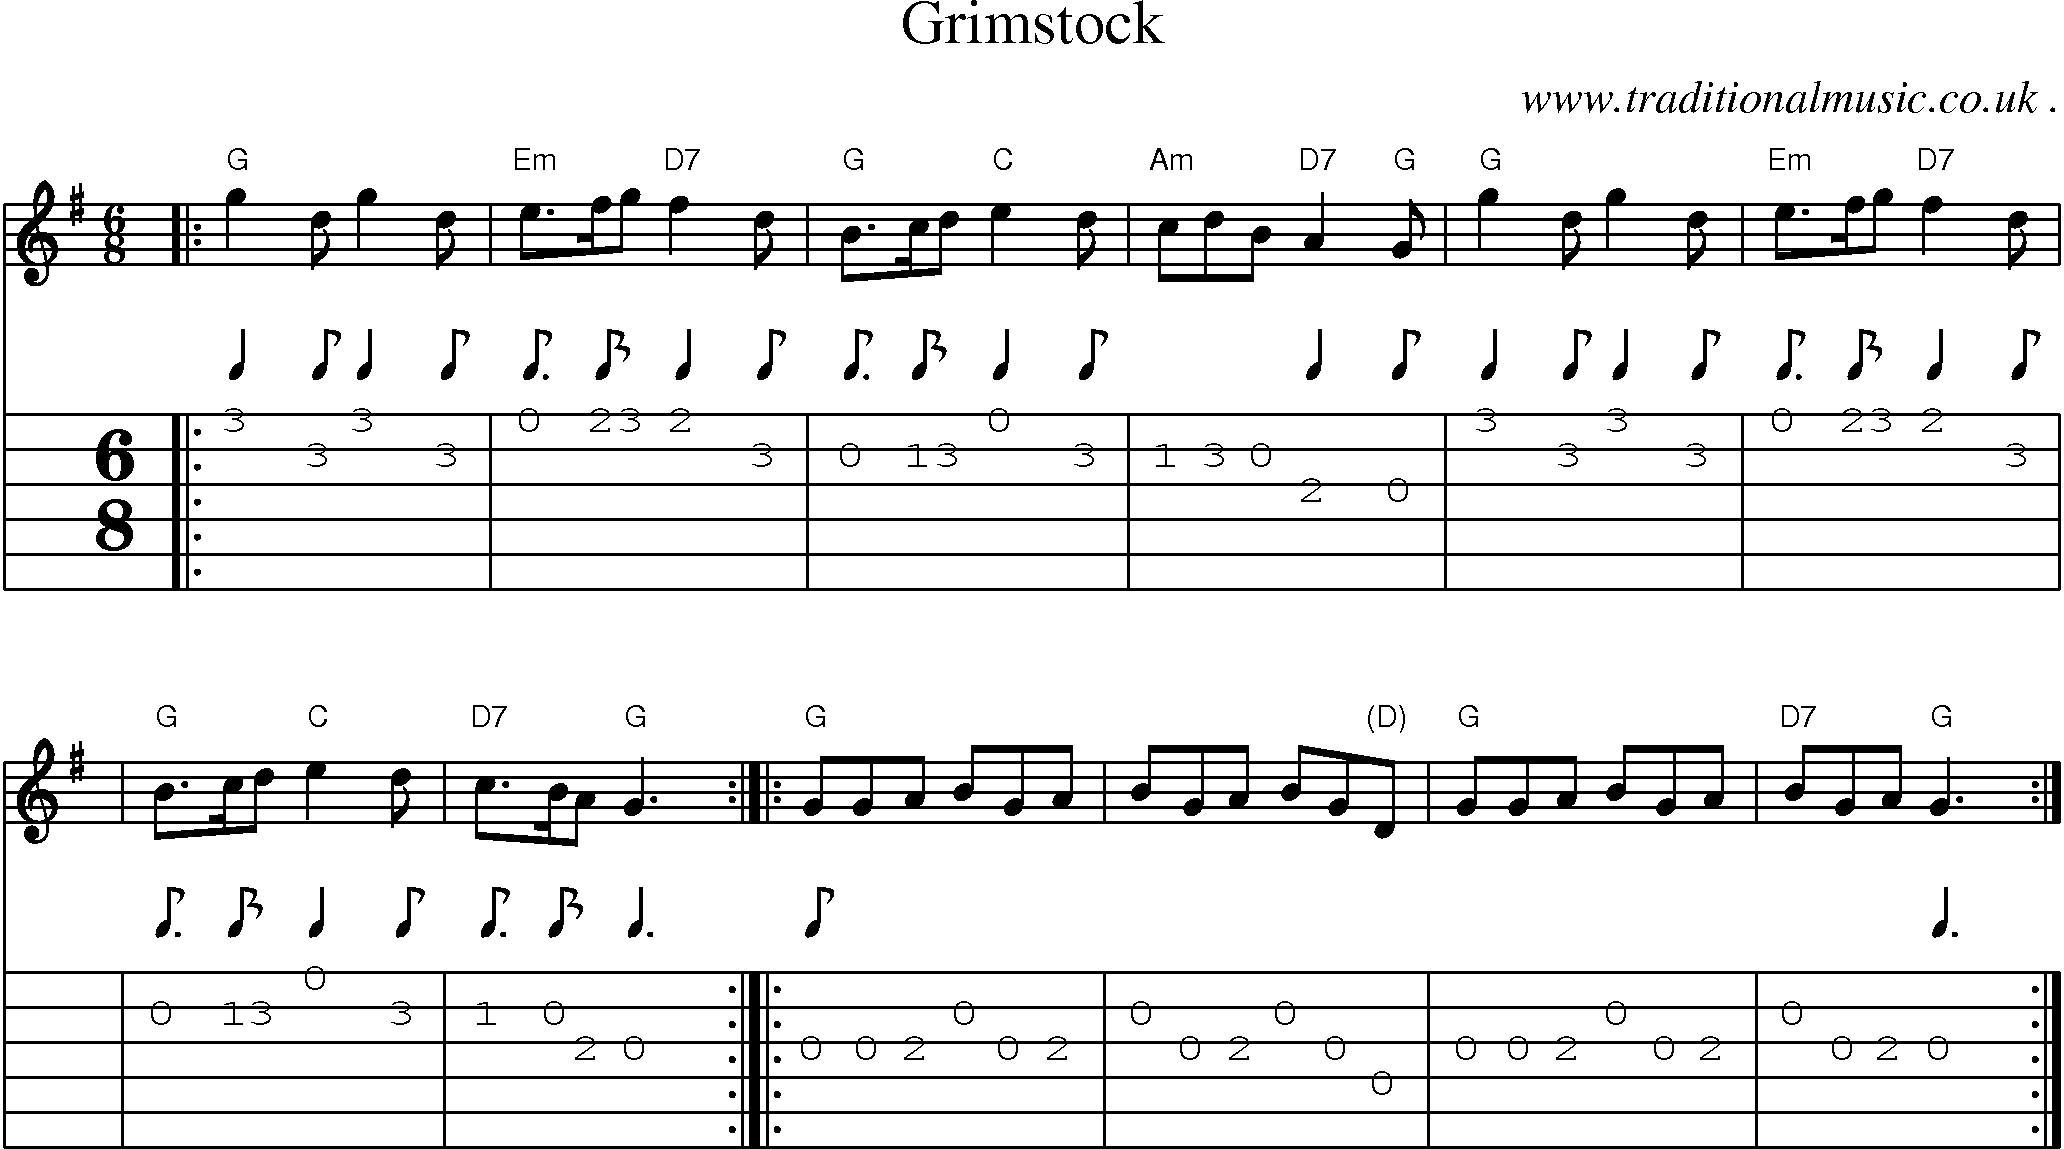 Sheet-music  score, Chords and Guitar Tabs for Grimstock